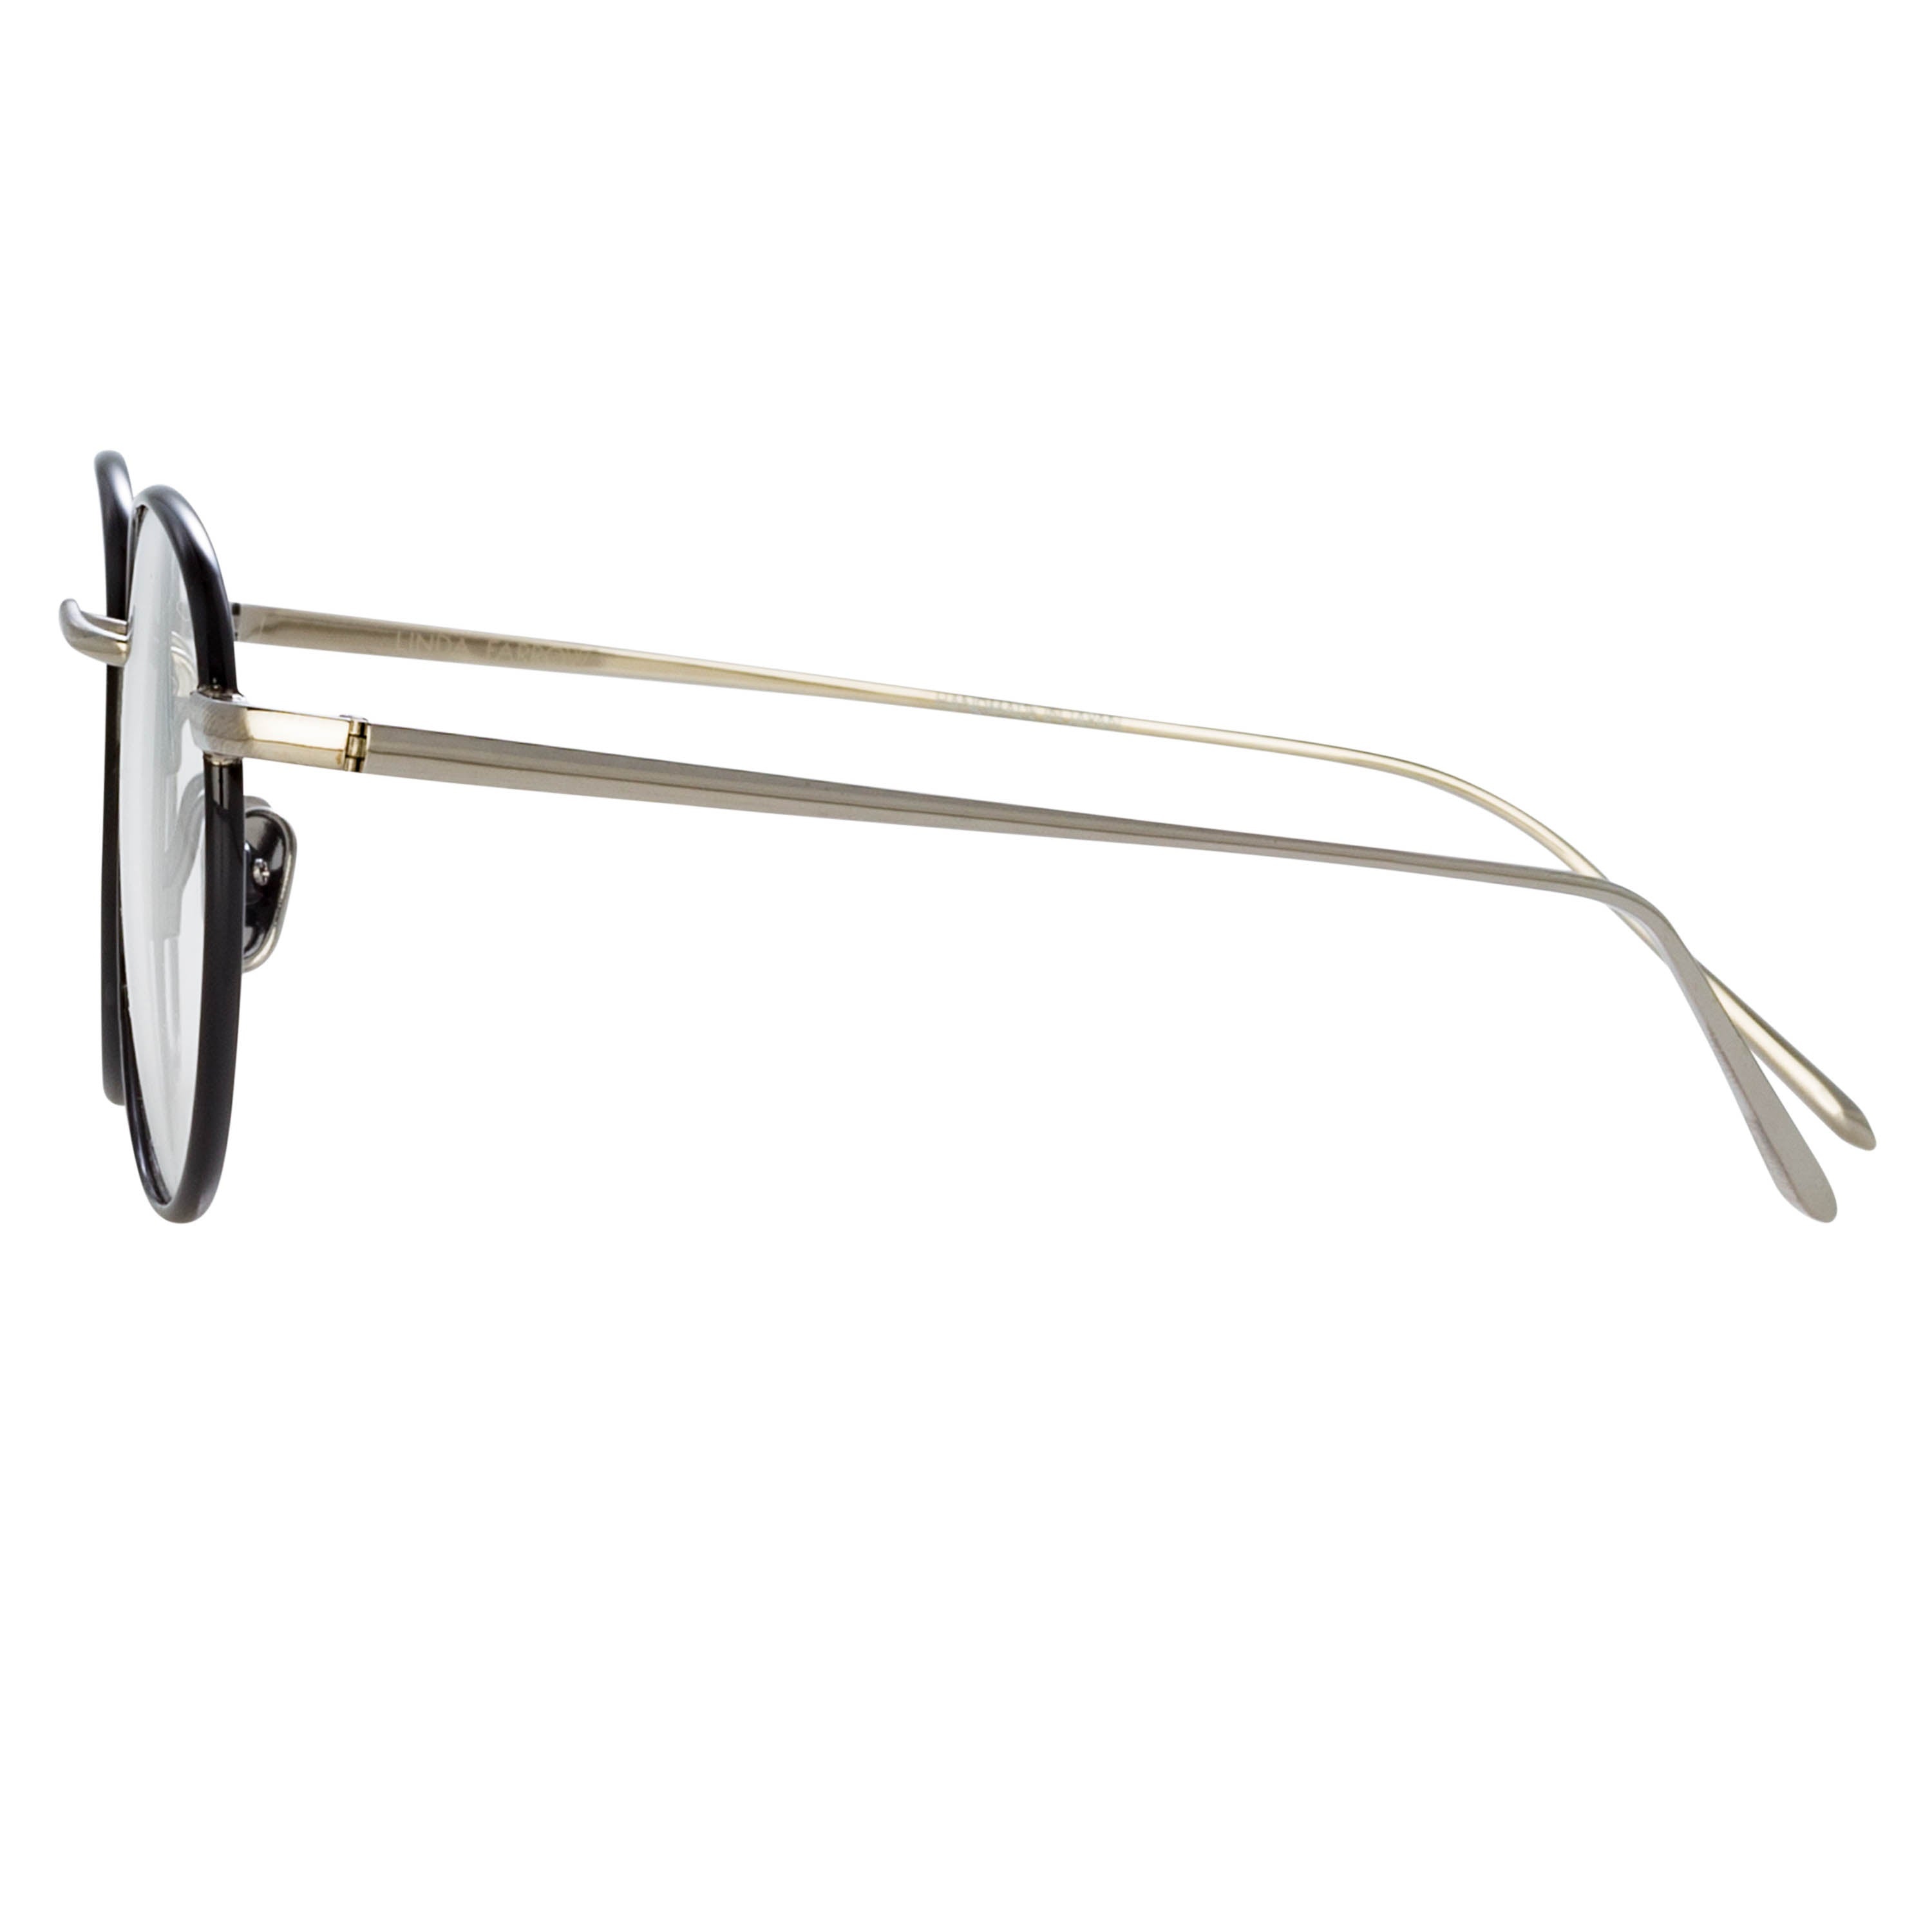 THE HARRISON | OVAL OPTICAL FRAME IN BLACK AND WHITE GOLD (C2) - 3